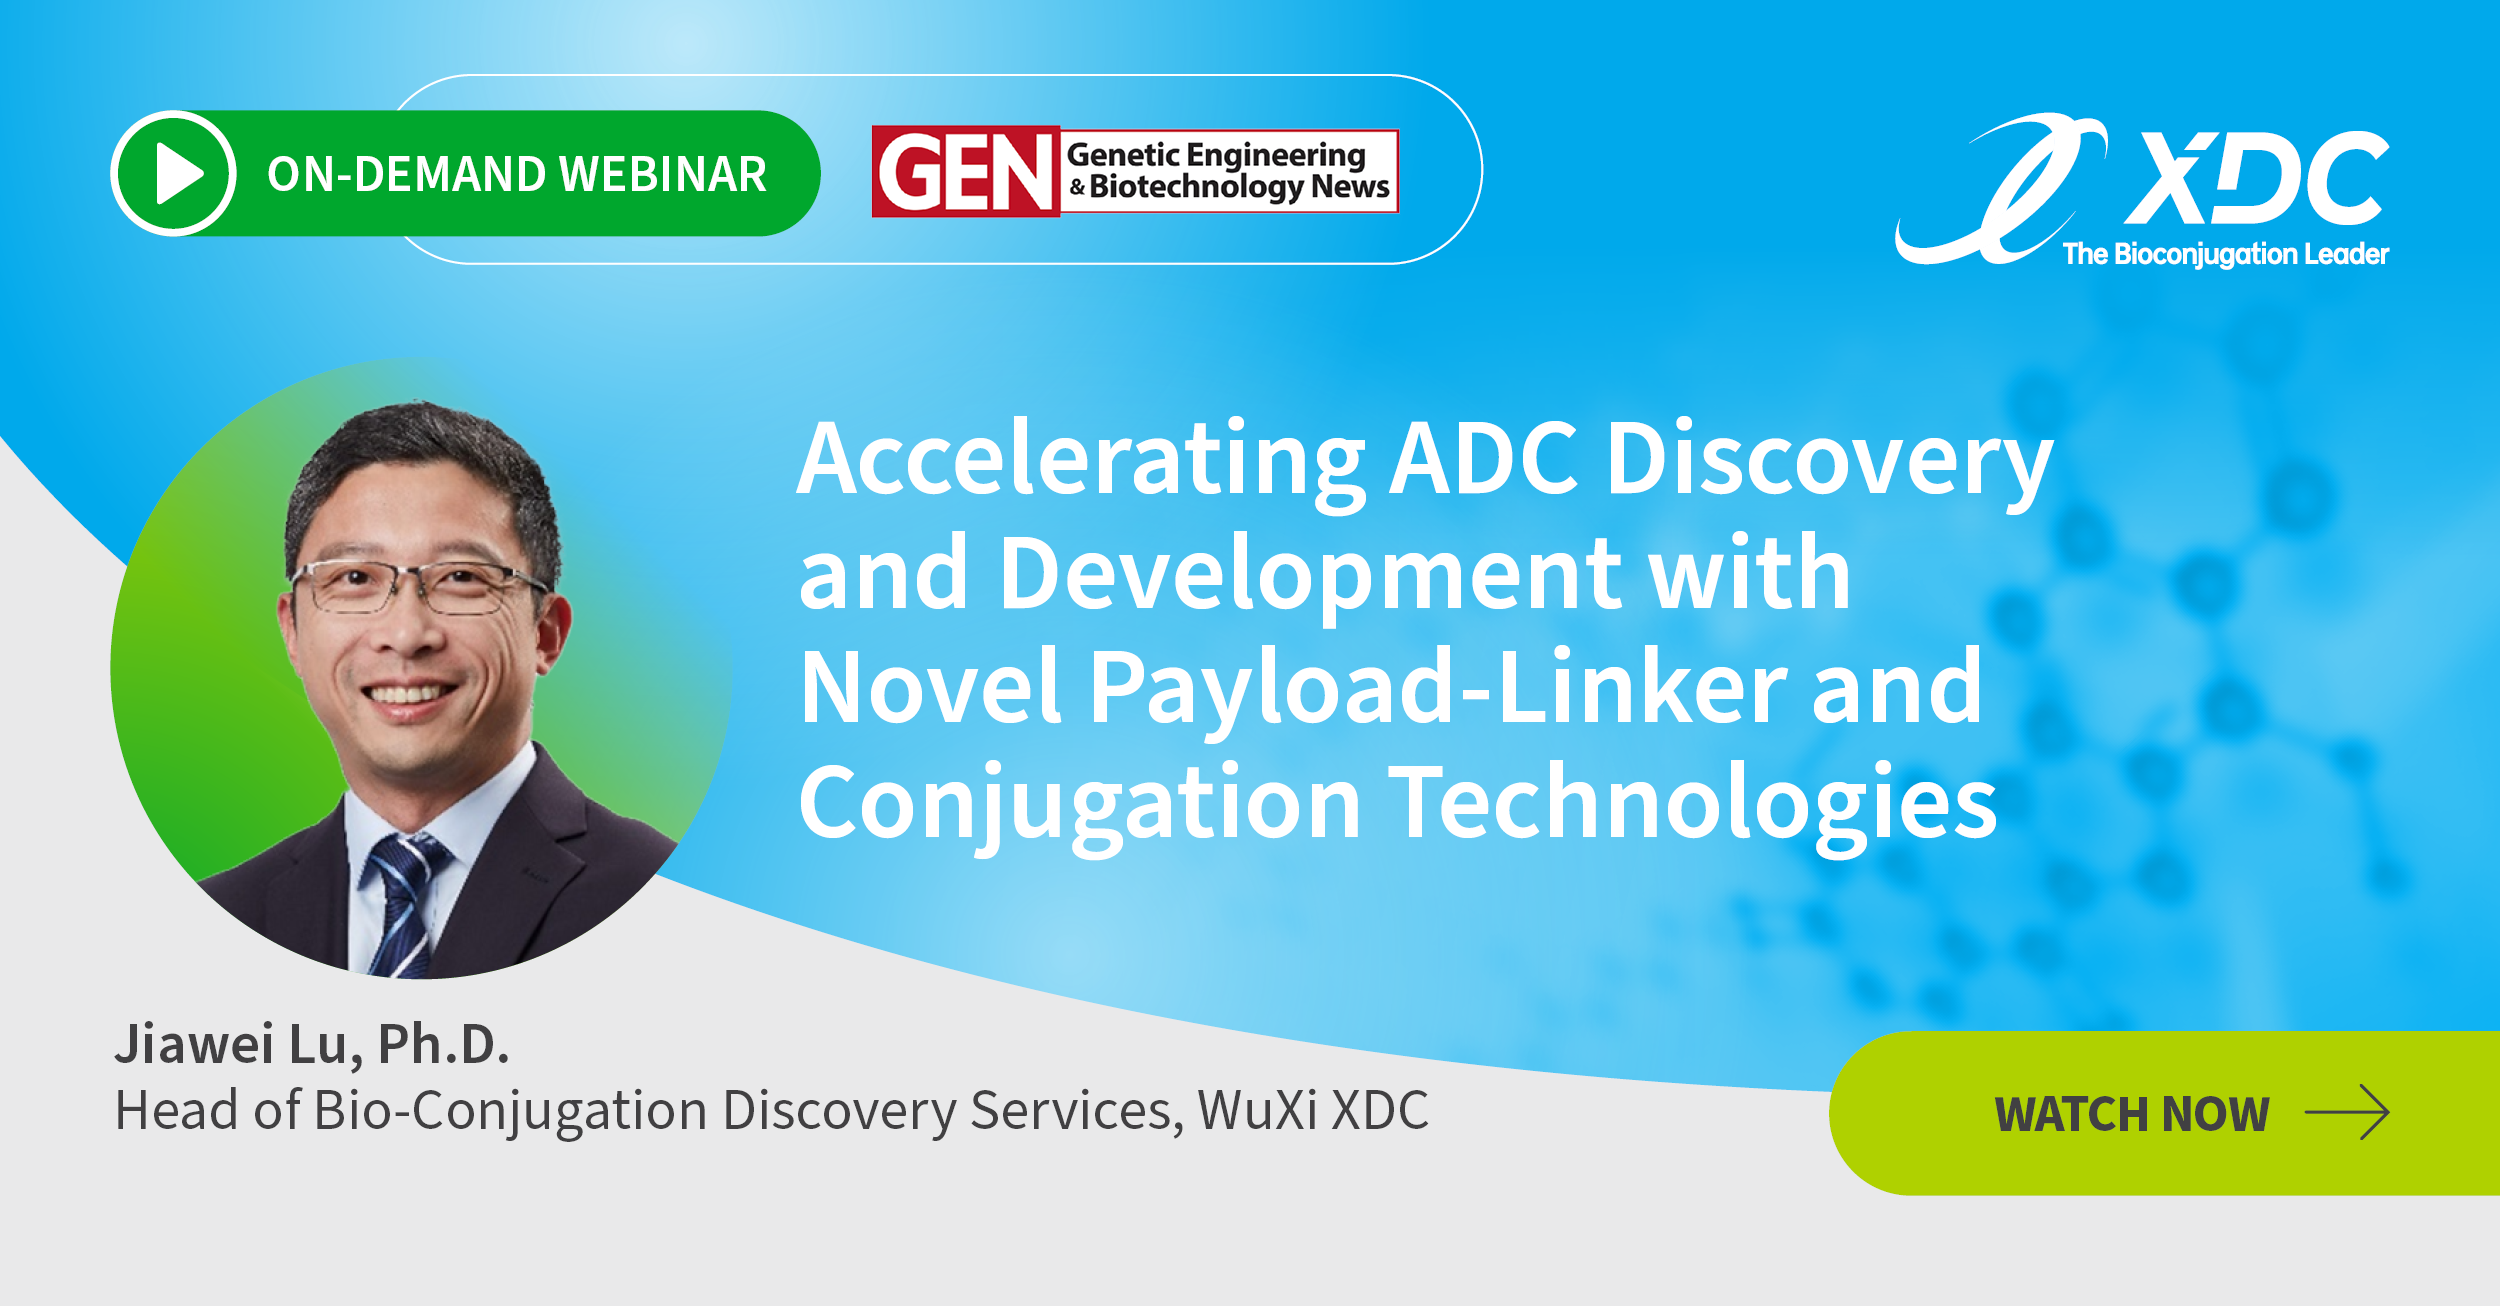 Accelerating ADC Discovery and Development with Novel Payload-Linker and Conjugation Technologies